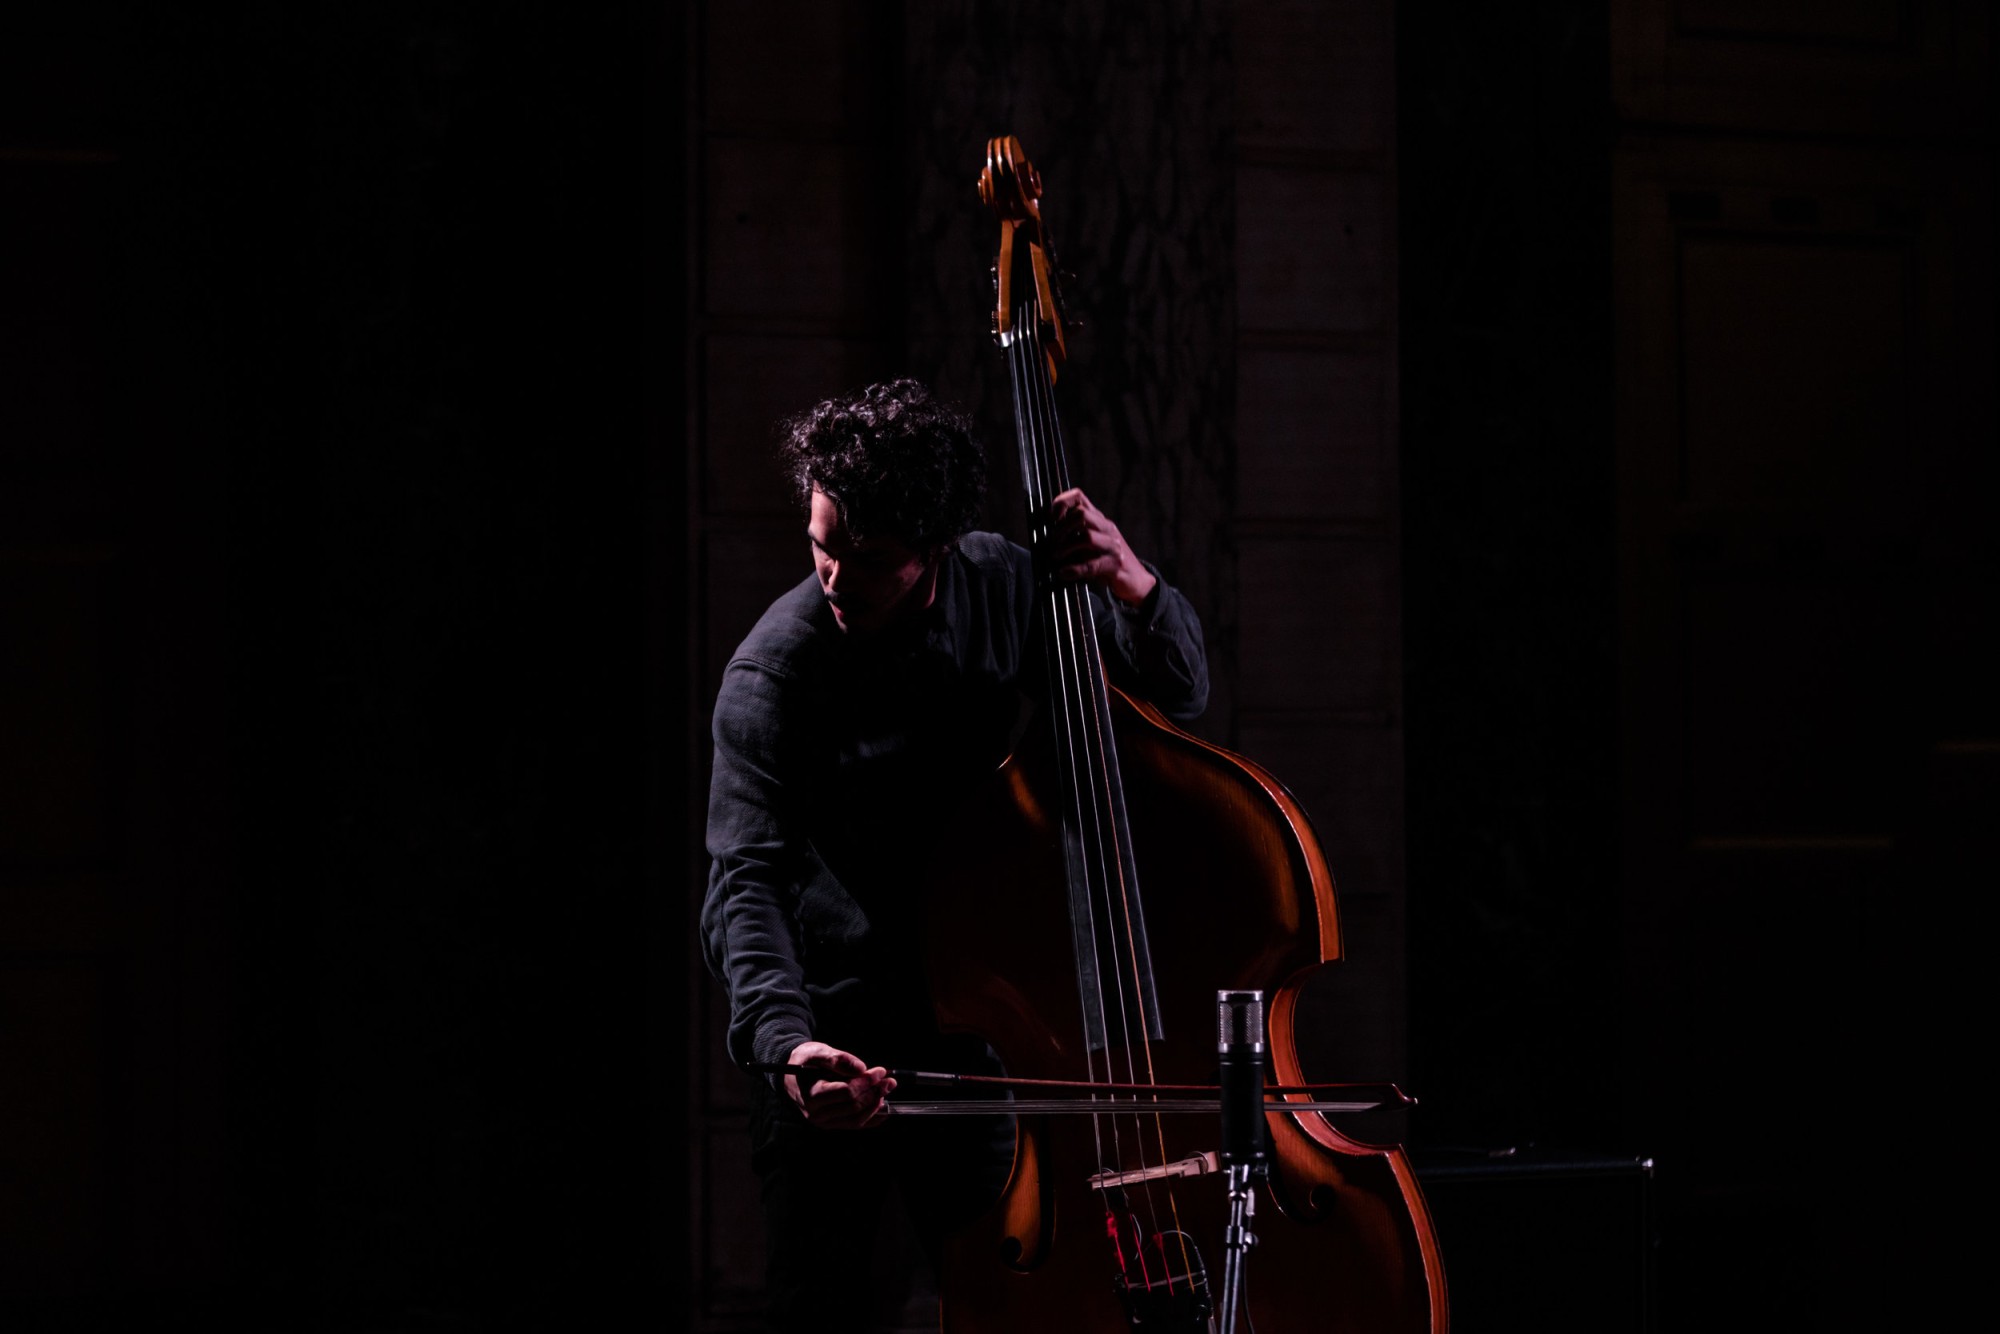 Brandon Lopez is playing the upright bass, obscured mostly in shadows, in front of a black background